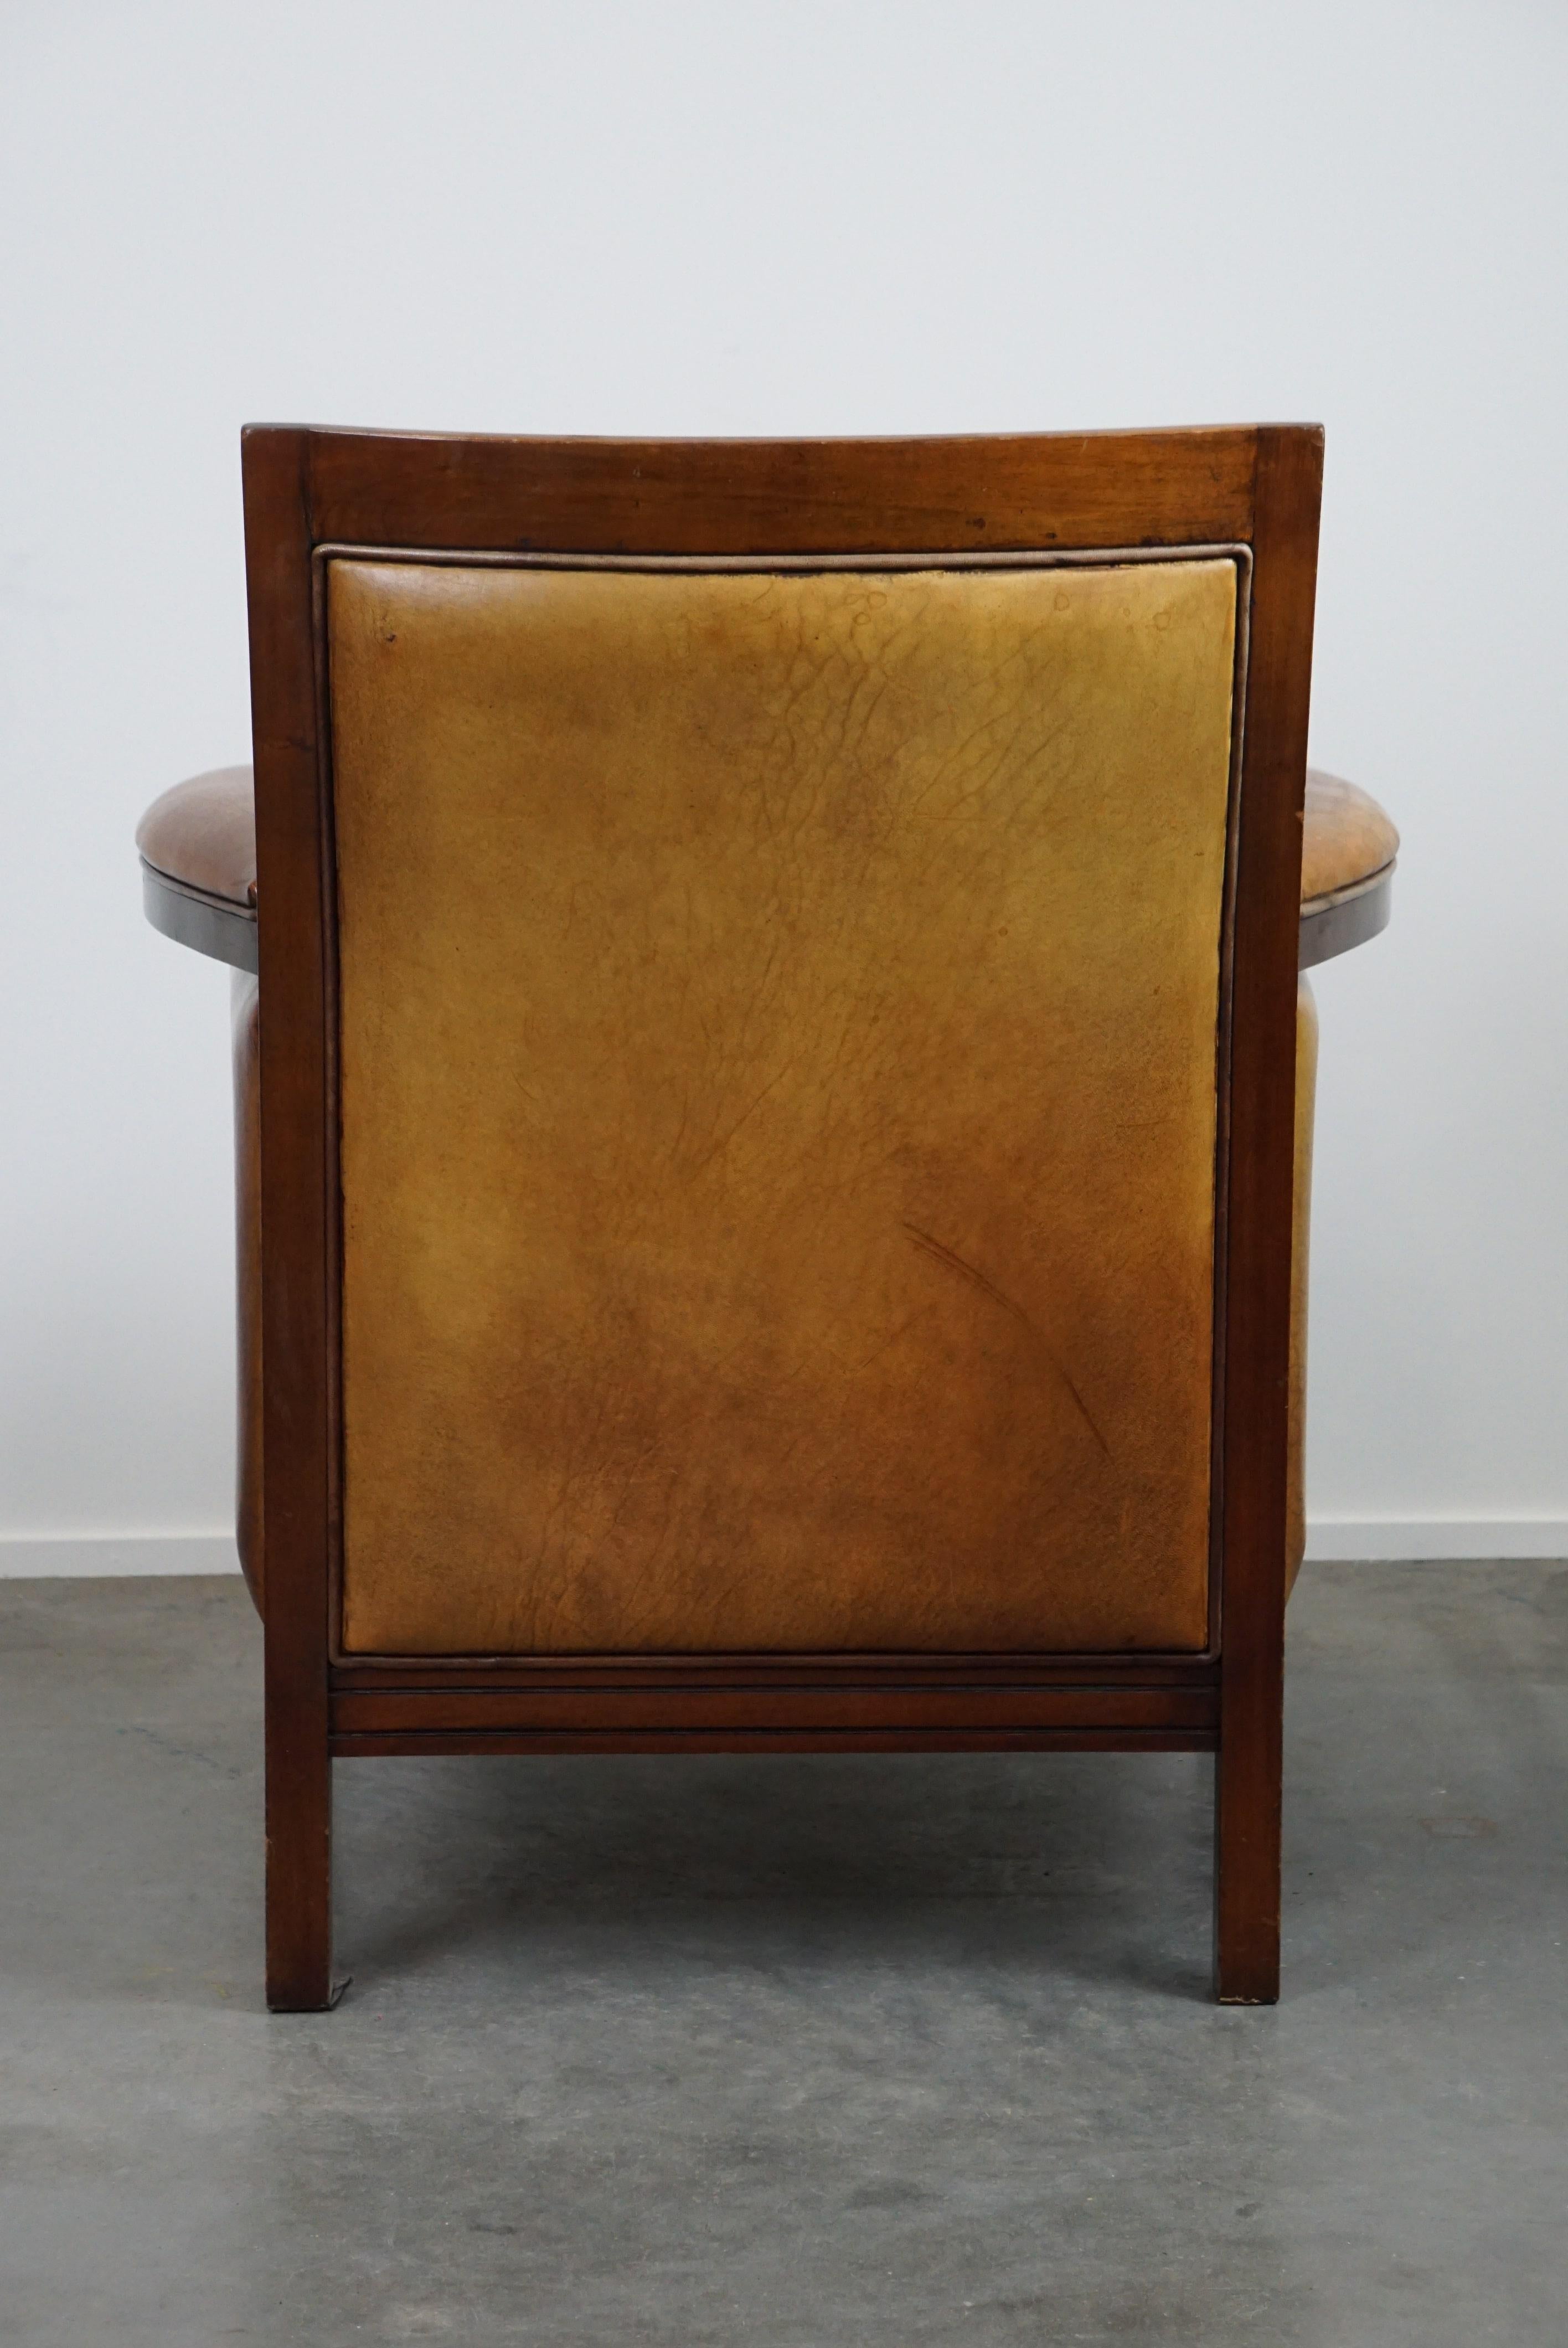 20th Century Sheep leather Art Deco design armchair with high seating comfort For Sale